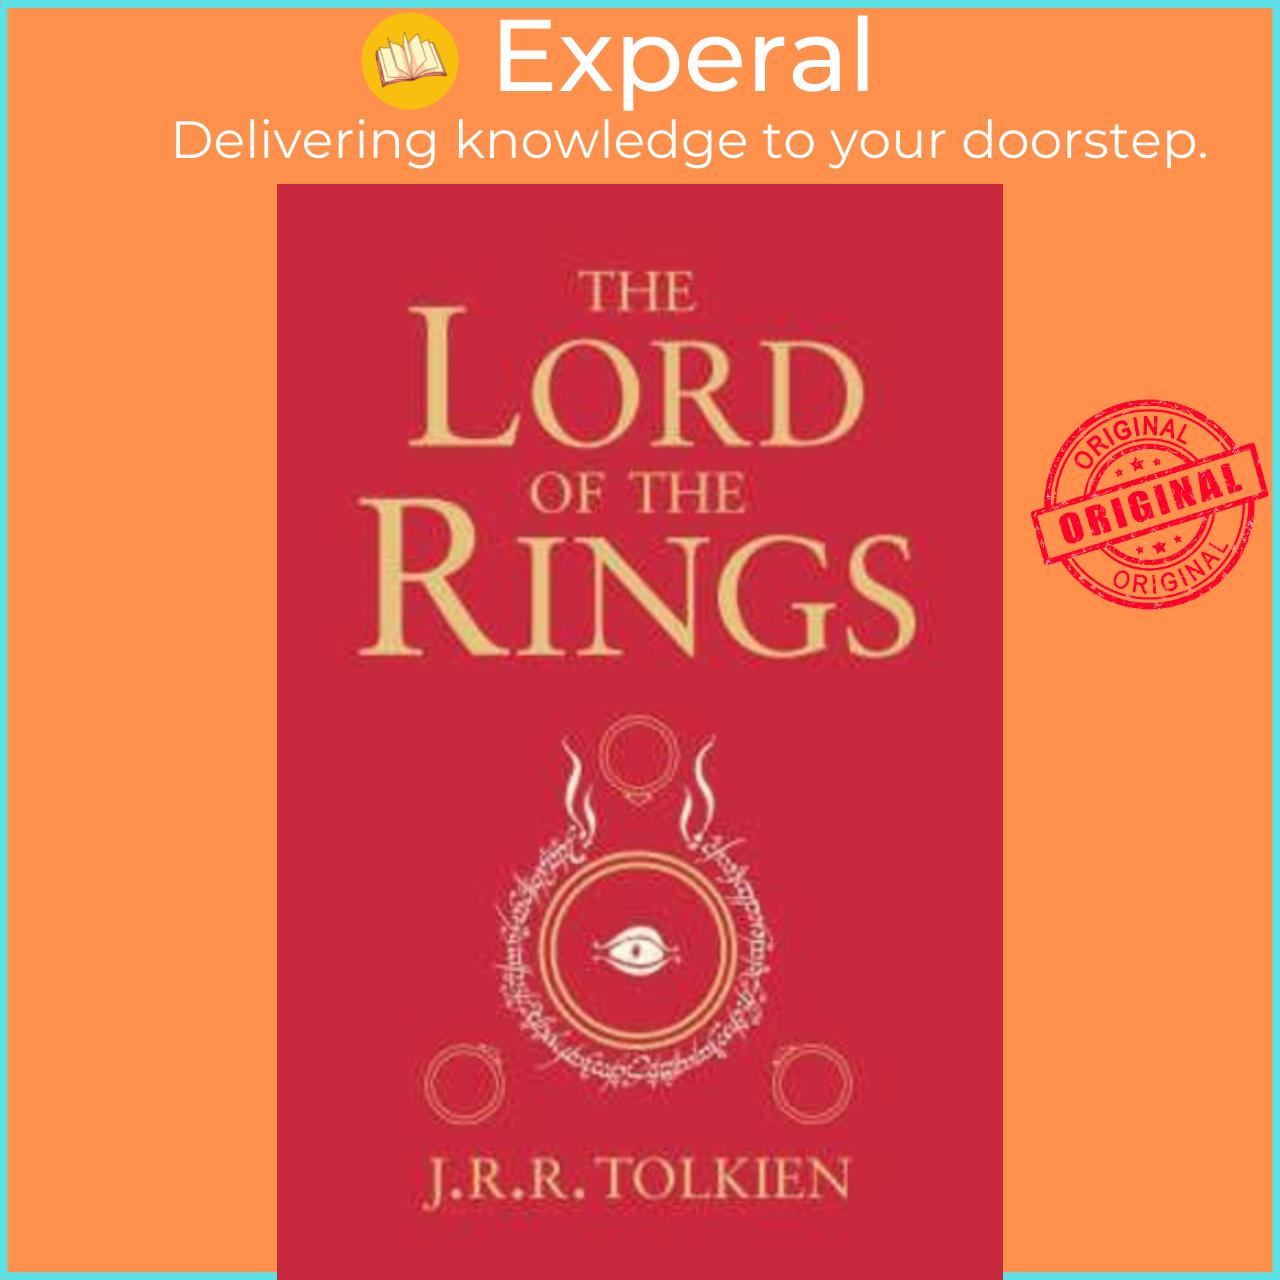 Sách - The Lord of the Rings by J. R. R. Tolkien (UK edition, paperback)